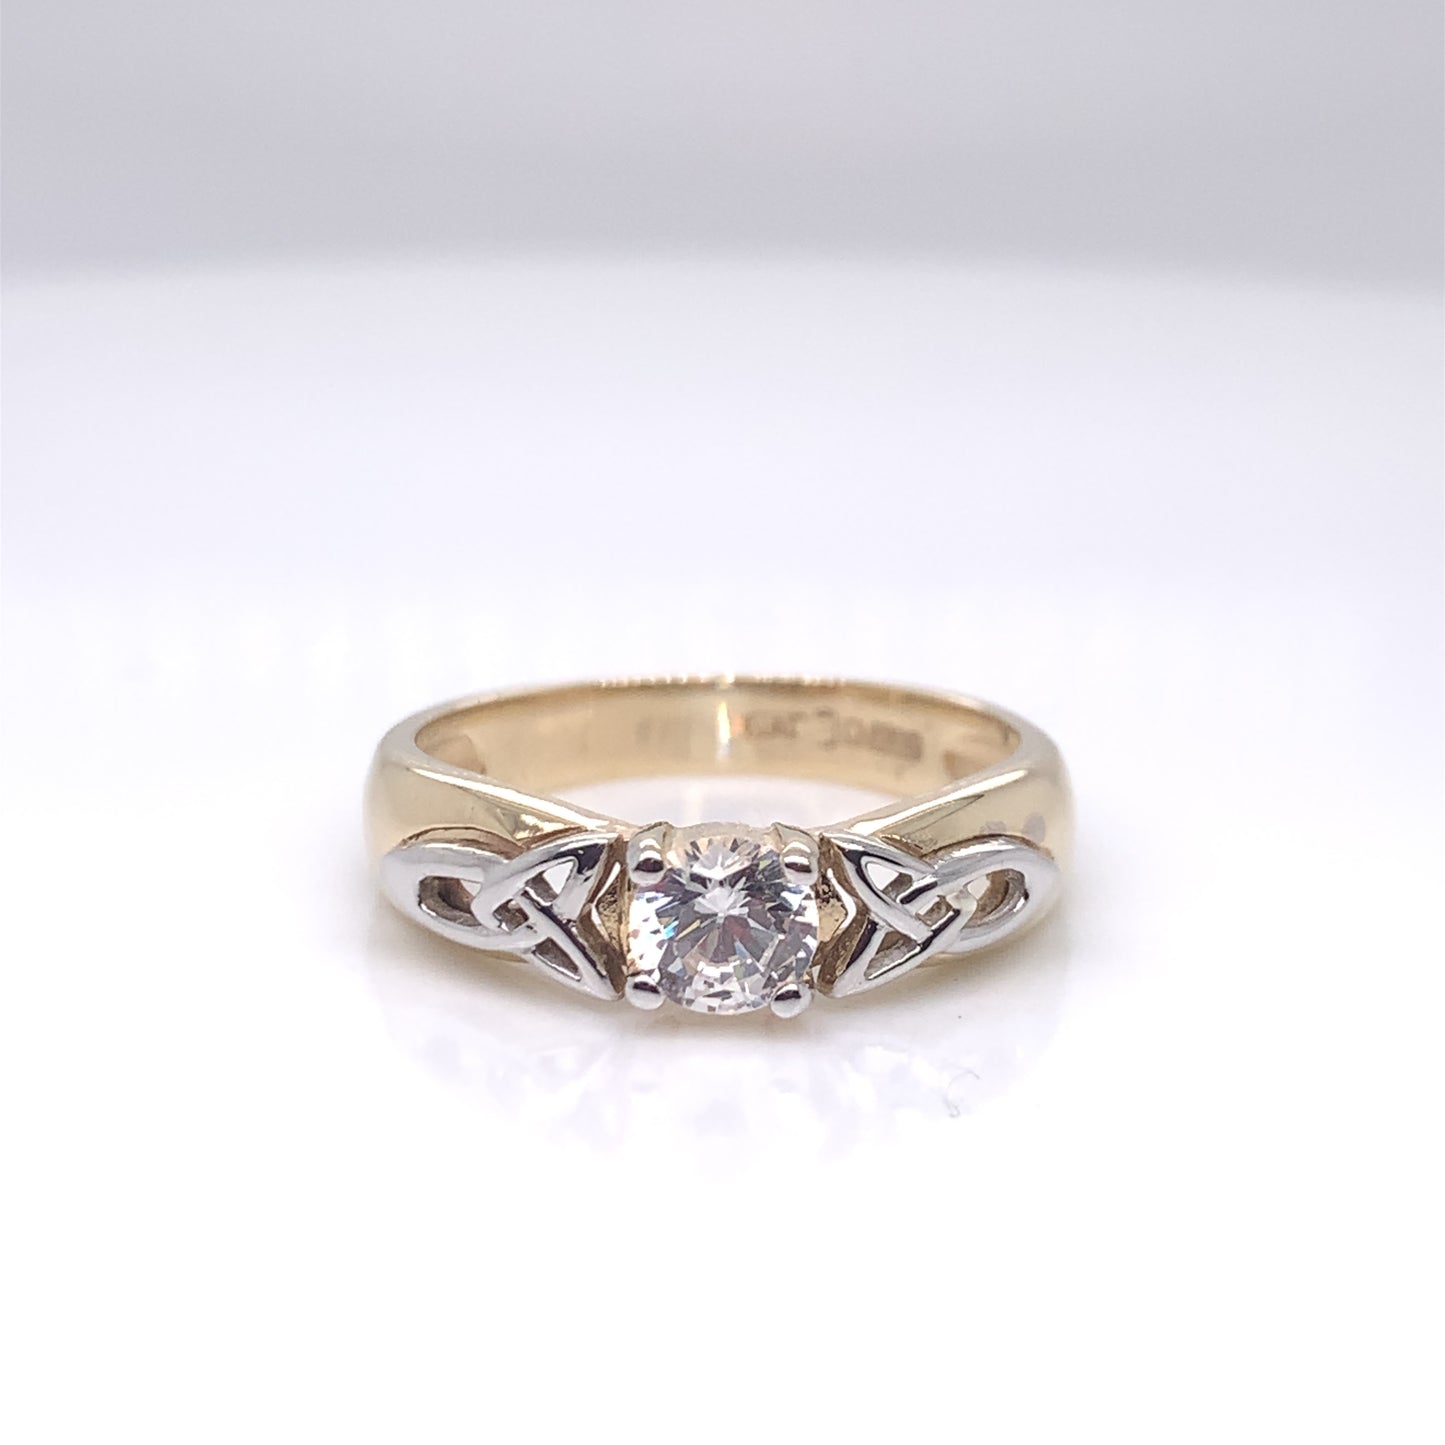 10ct Gold CZ Celtic Solitaire Ring